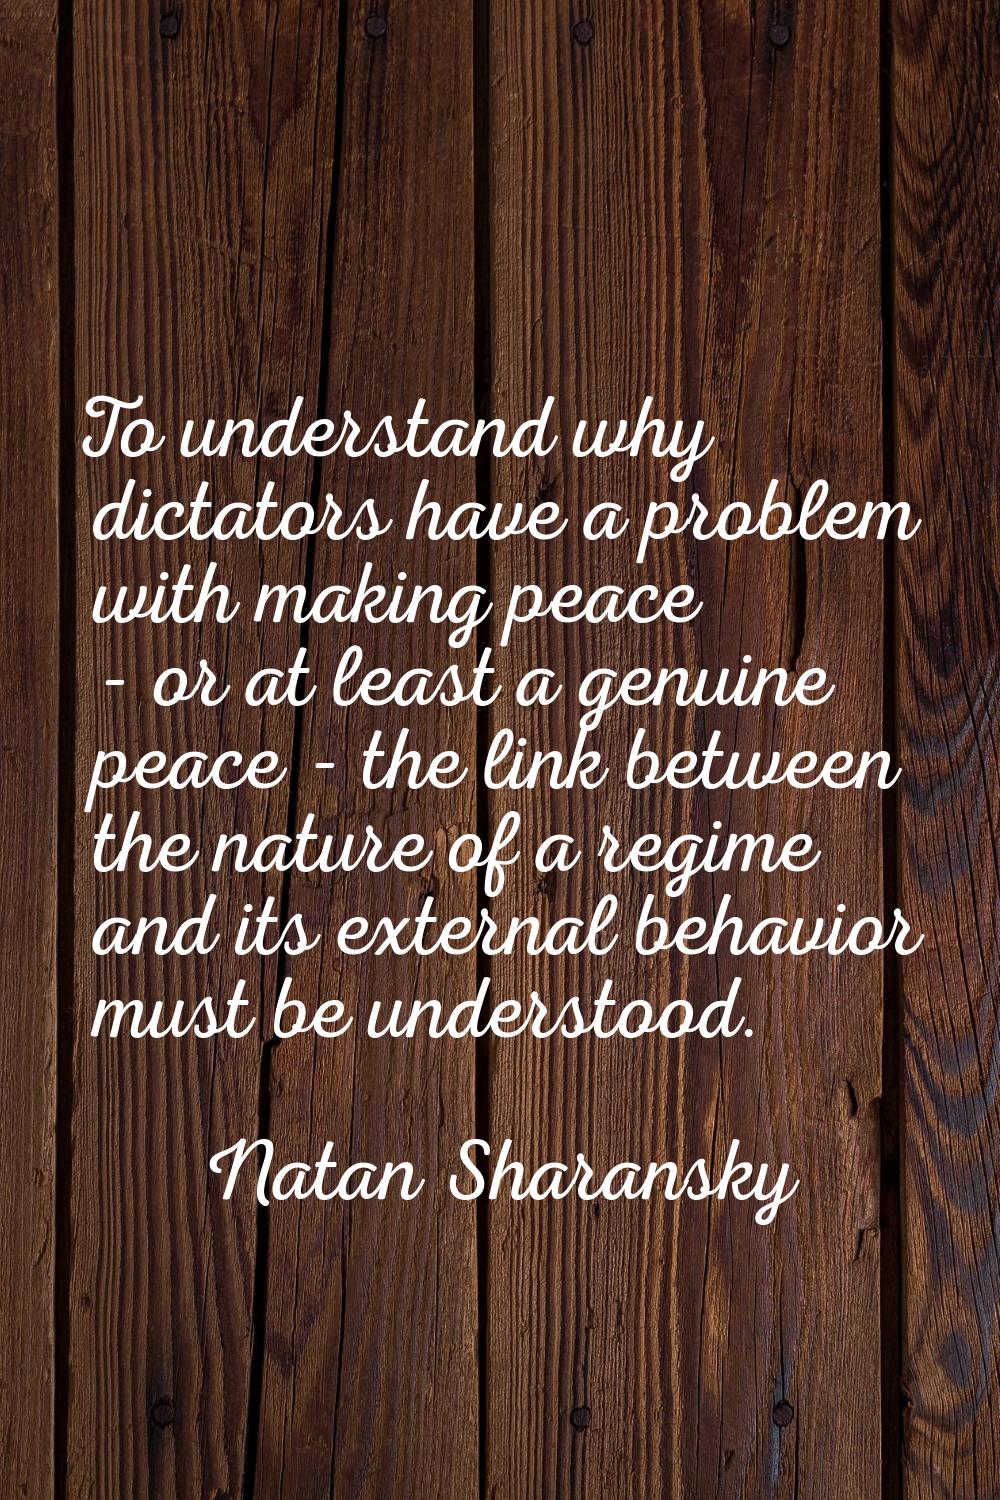 To understand why dictators have a problem with making peace - or at least a genuine peace - the li